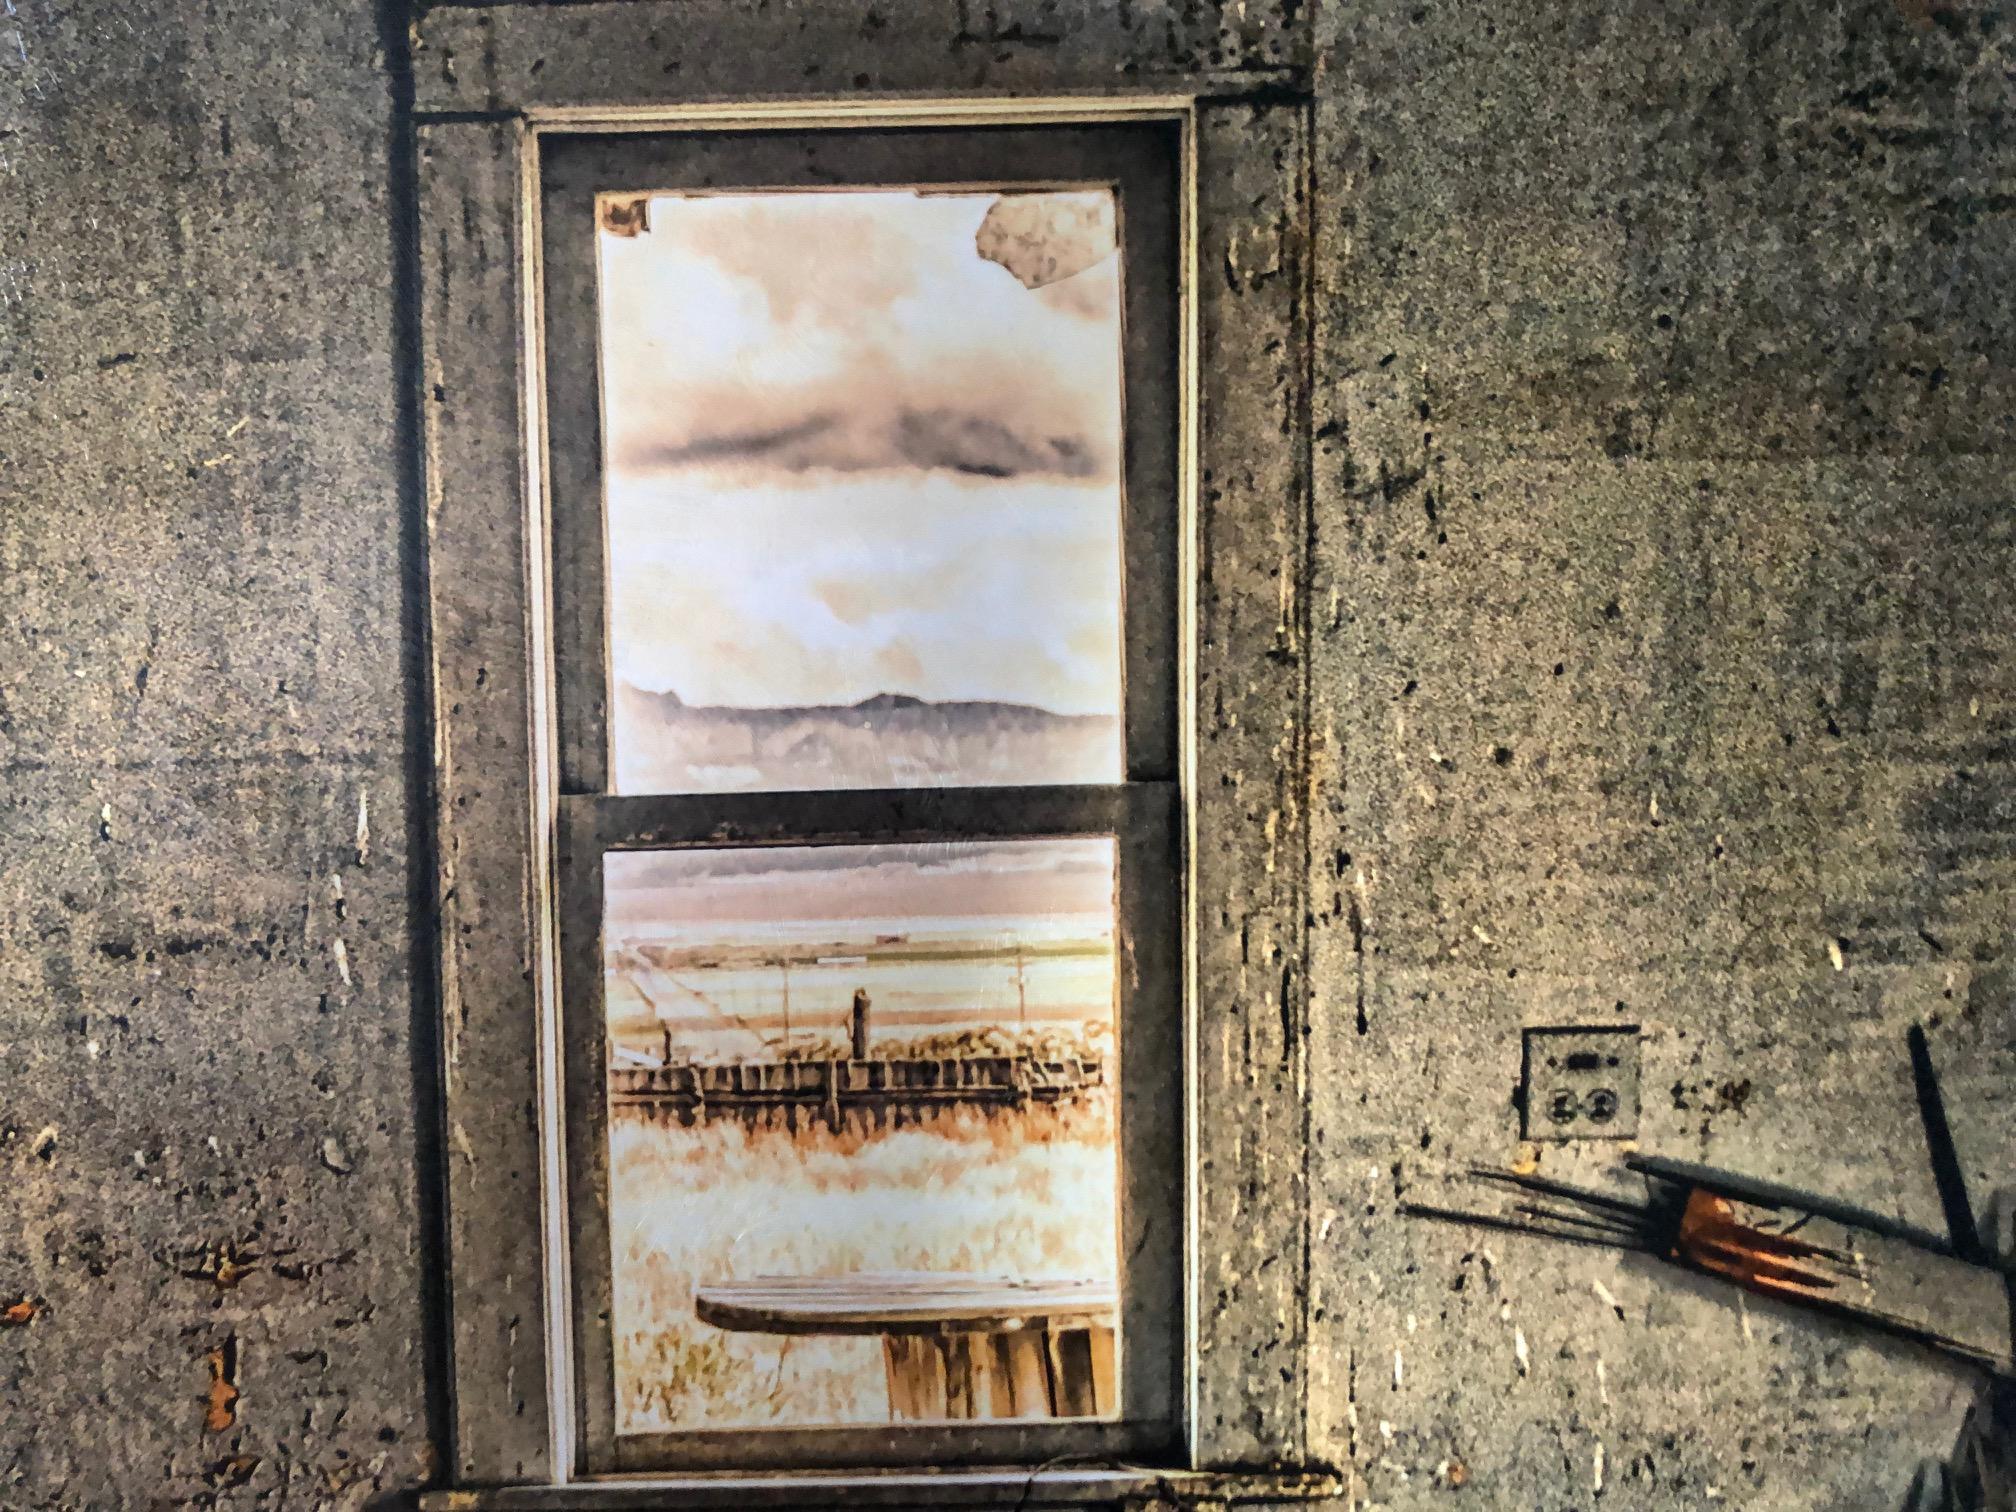 Timothy White is a mixed media artist who comes from a background in fine furniture making. His current body of work is a series of evocative mixed media panels, entitled “American Prosperity”, which explore the stories of encountered architecture